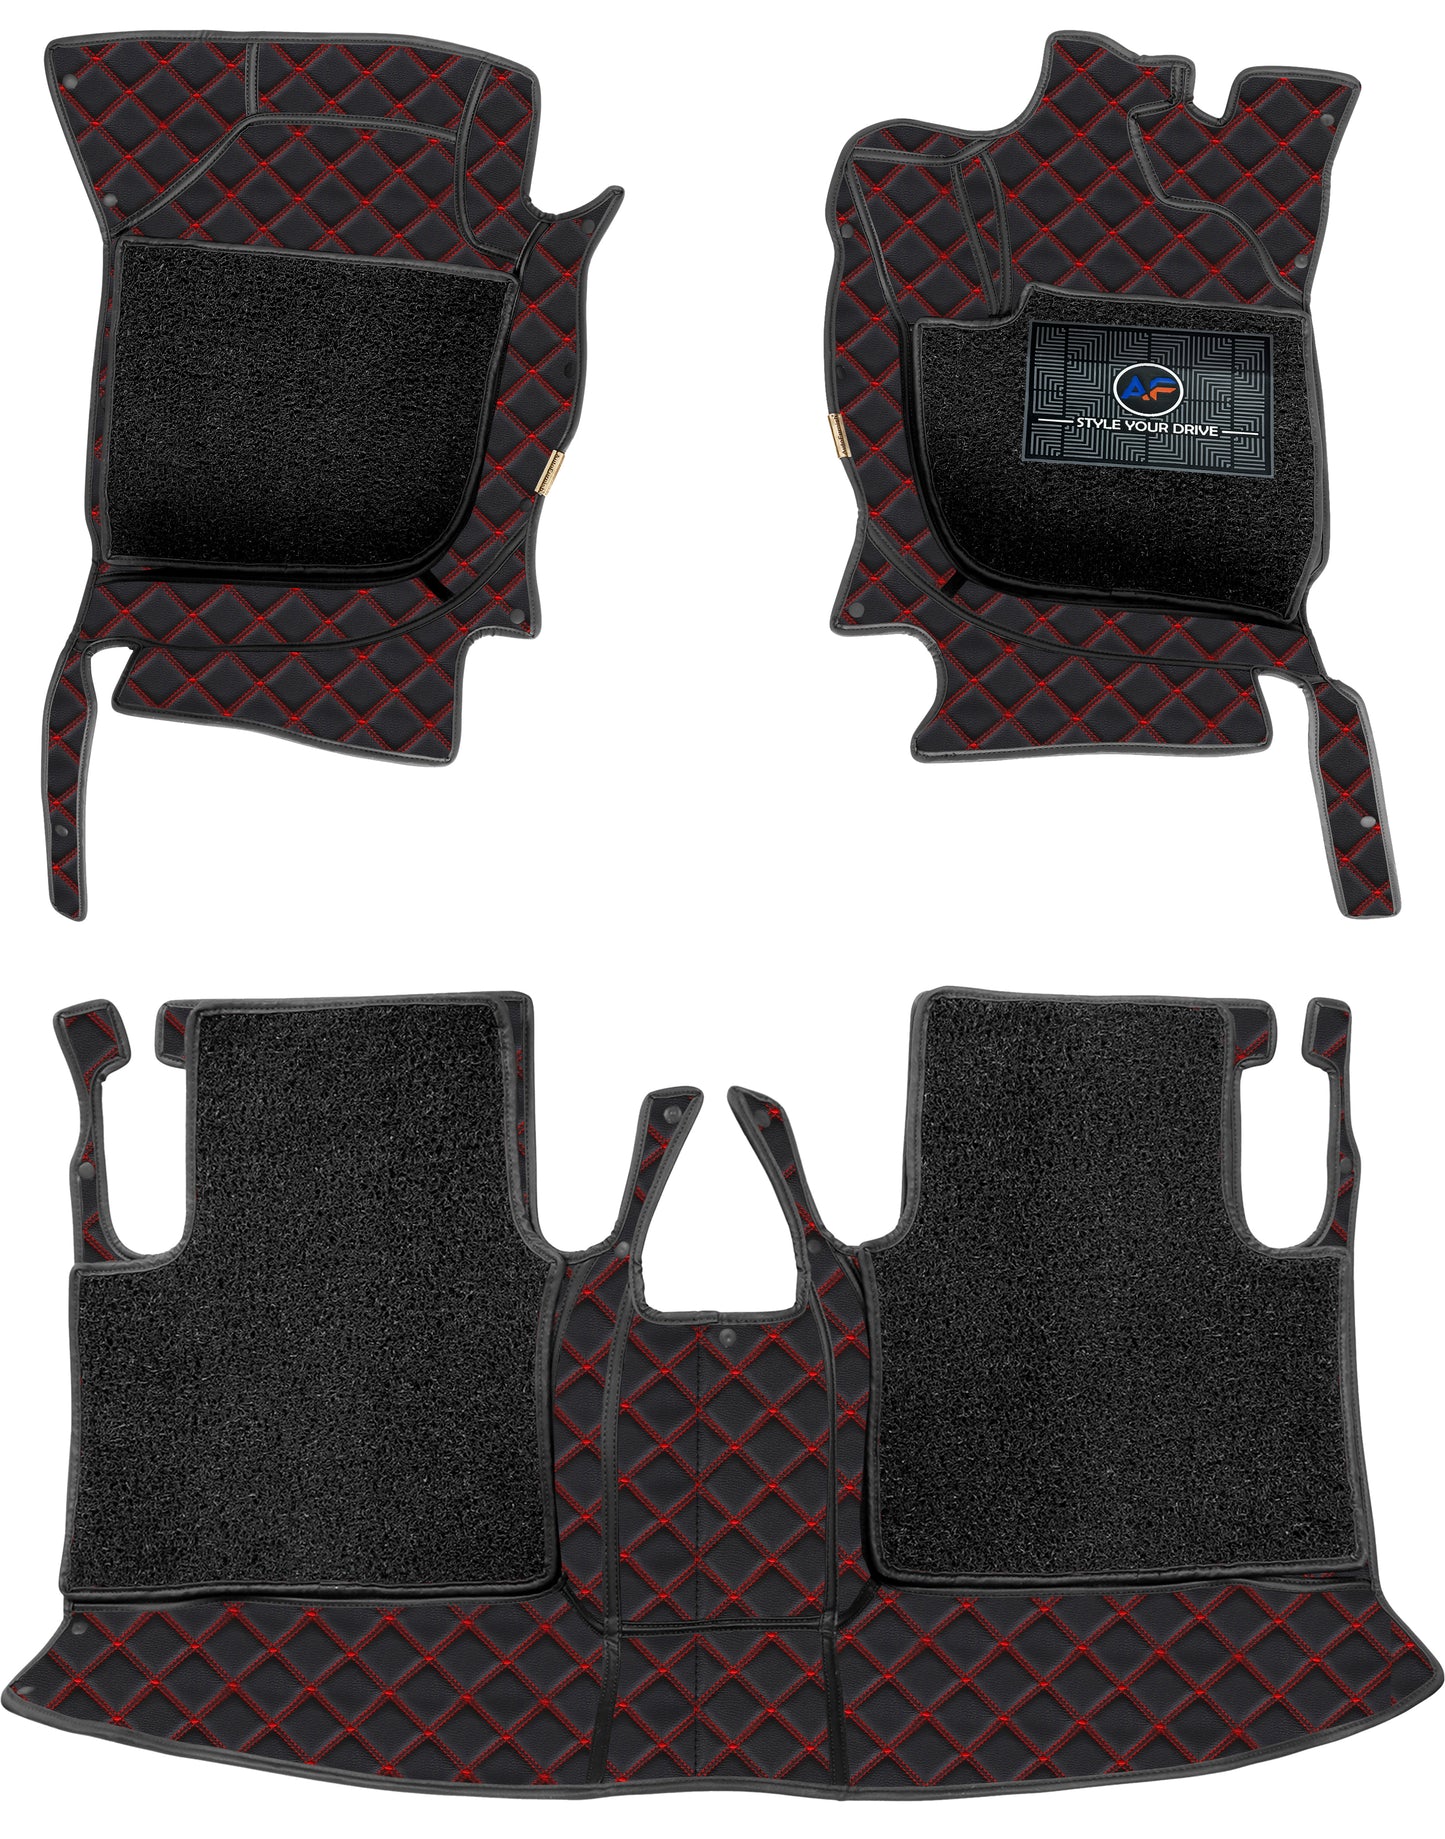 7d-luxury-car-footmats-for-Toyota-innova-crysta (2016-20)-custom-designed-pu-leather-with-7-layer-depth-24mm-3-rows